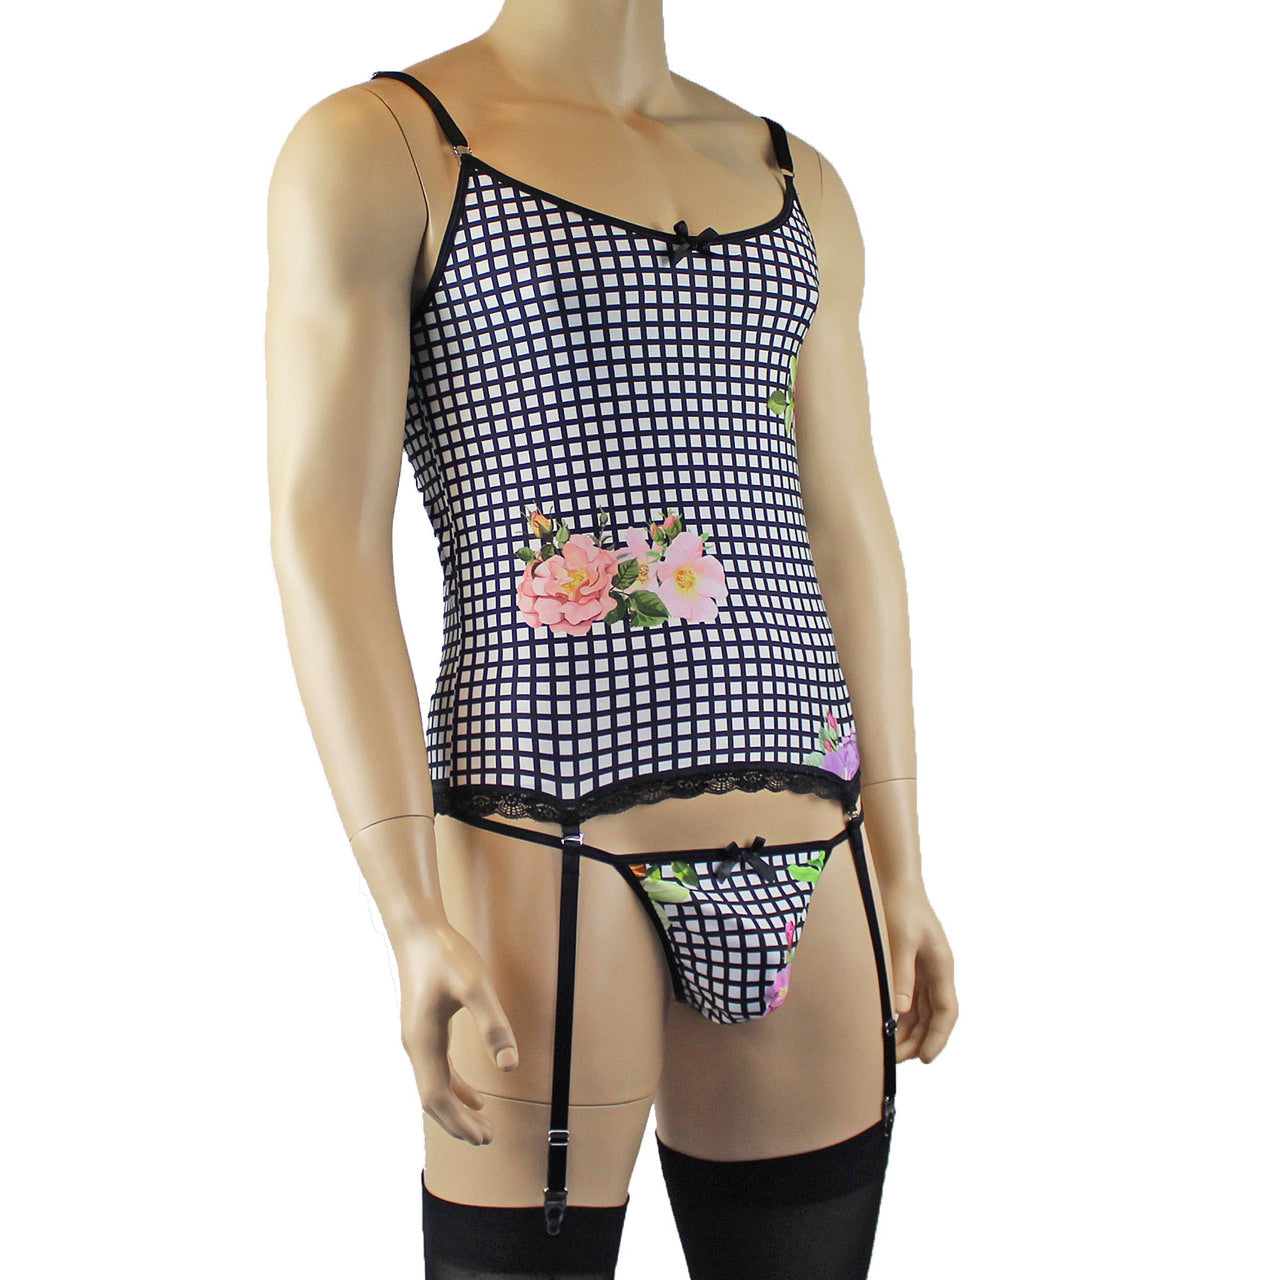 SALE - Mens Diana Camisole Corset Top in a Pretty Flower Checkered Spandex